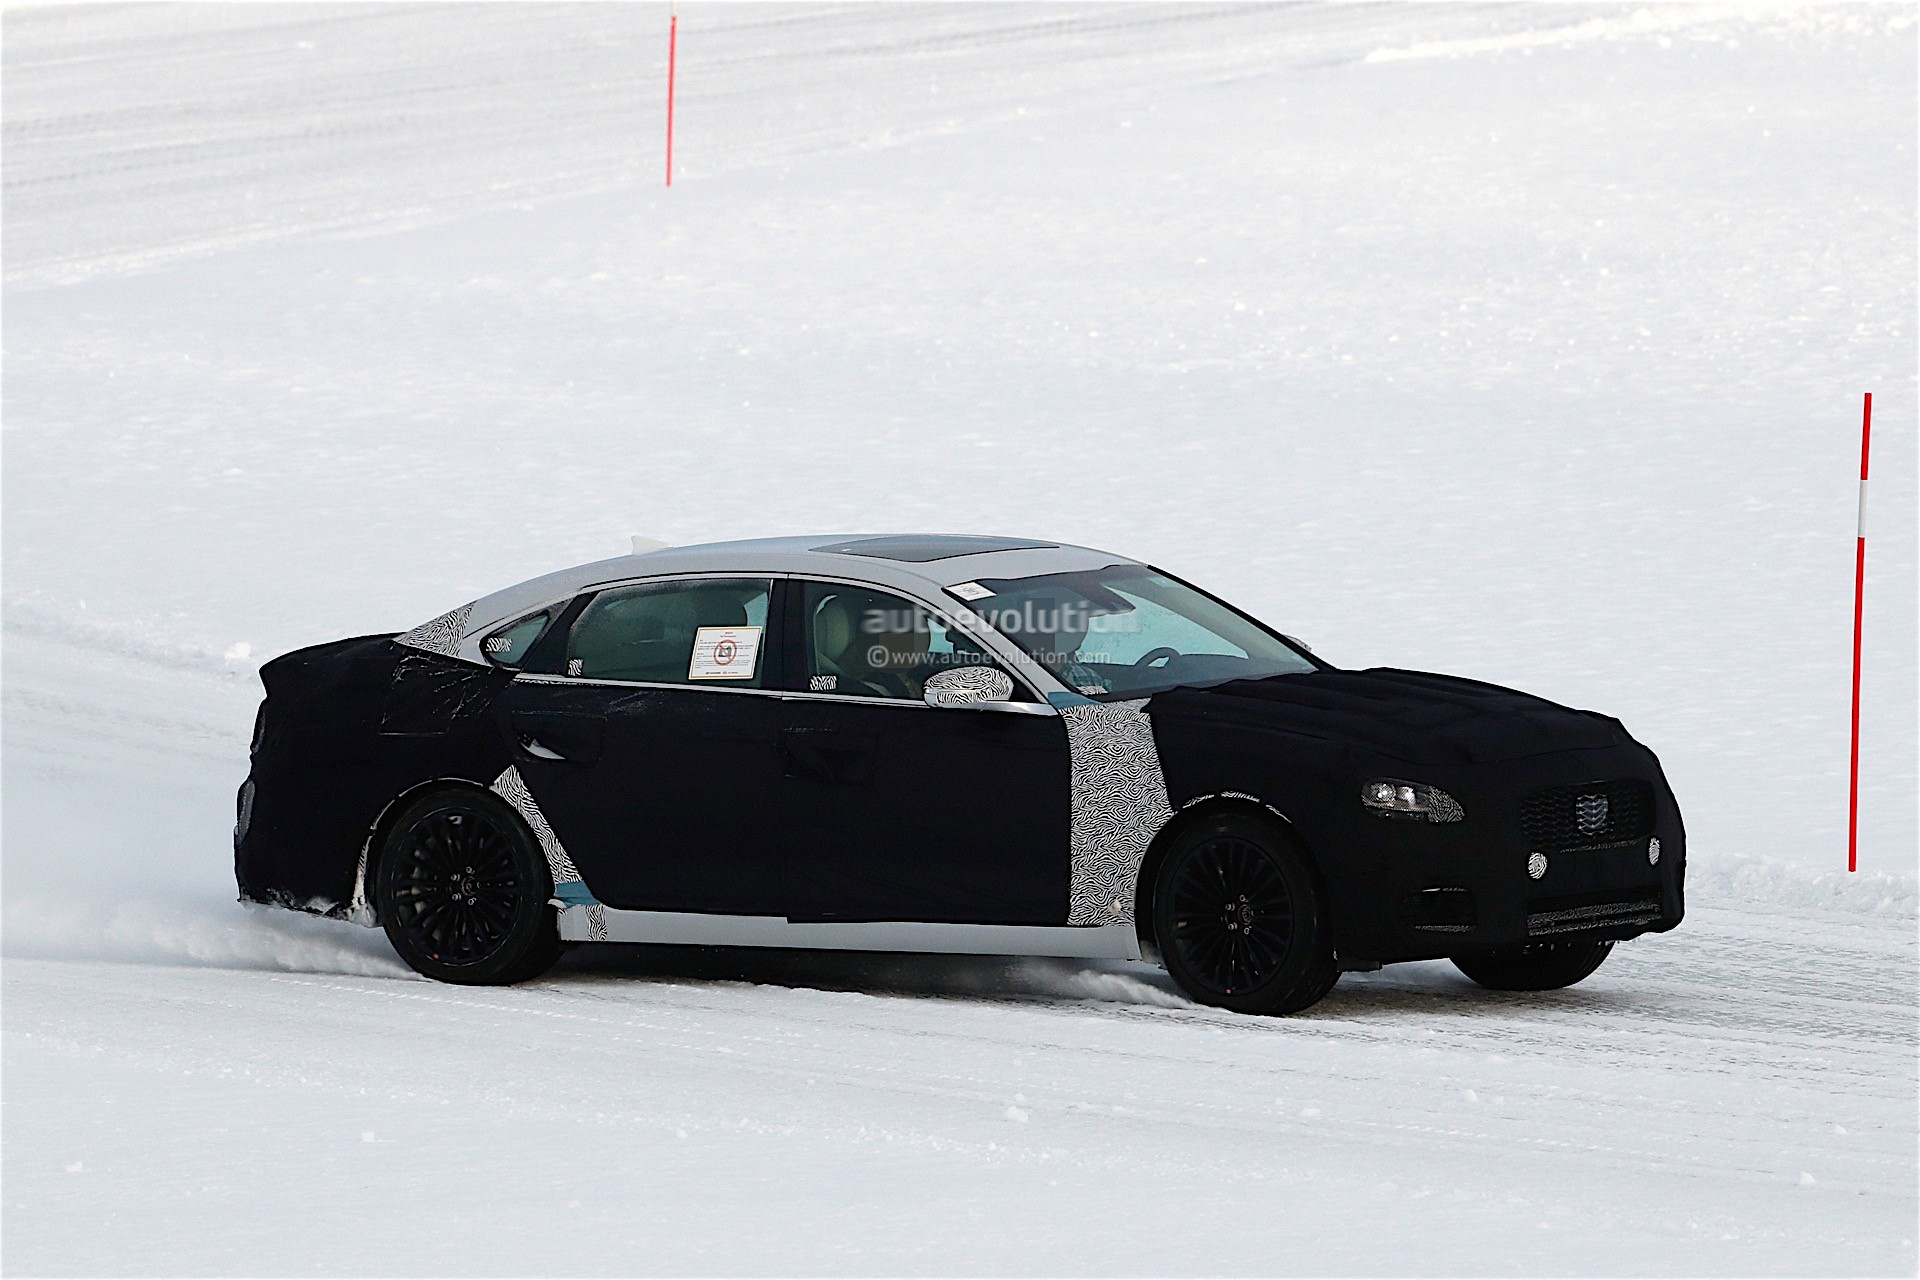 2018 Kia K9 Spied For The First Time, Debuts At The Arctic Circle ...